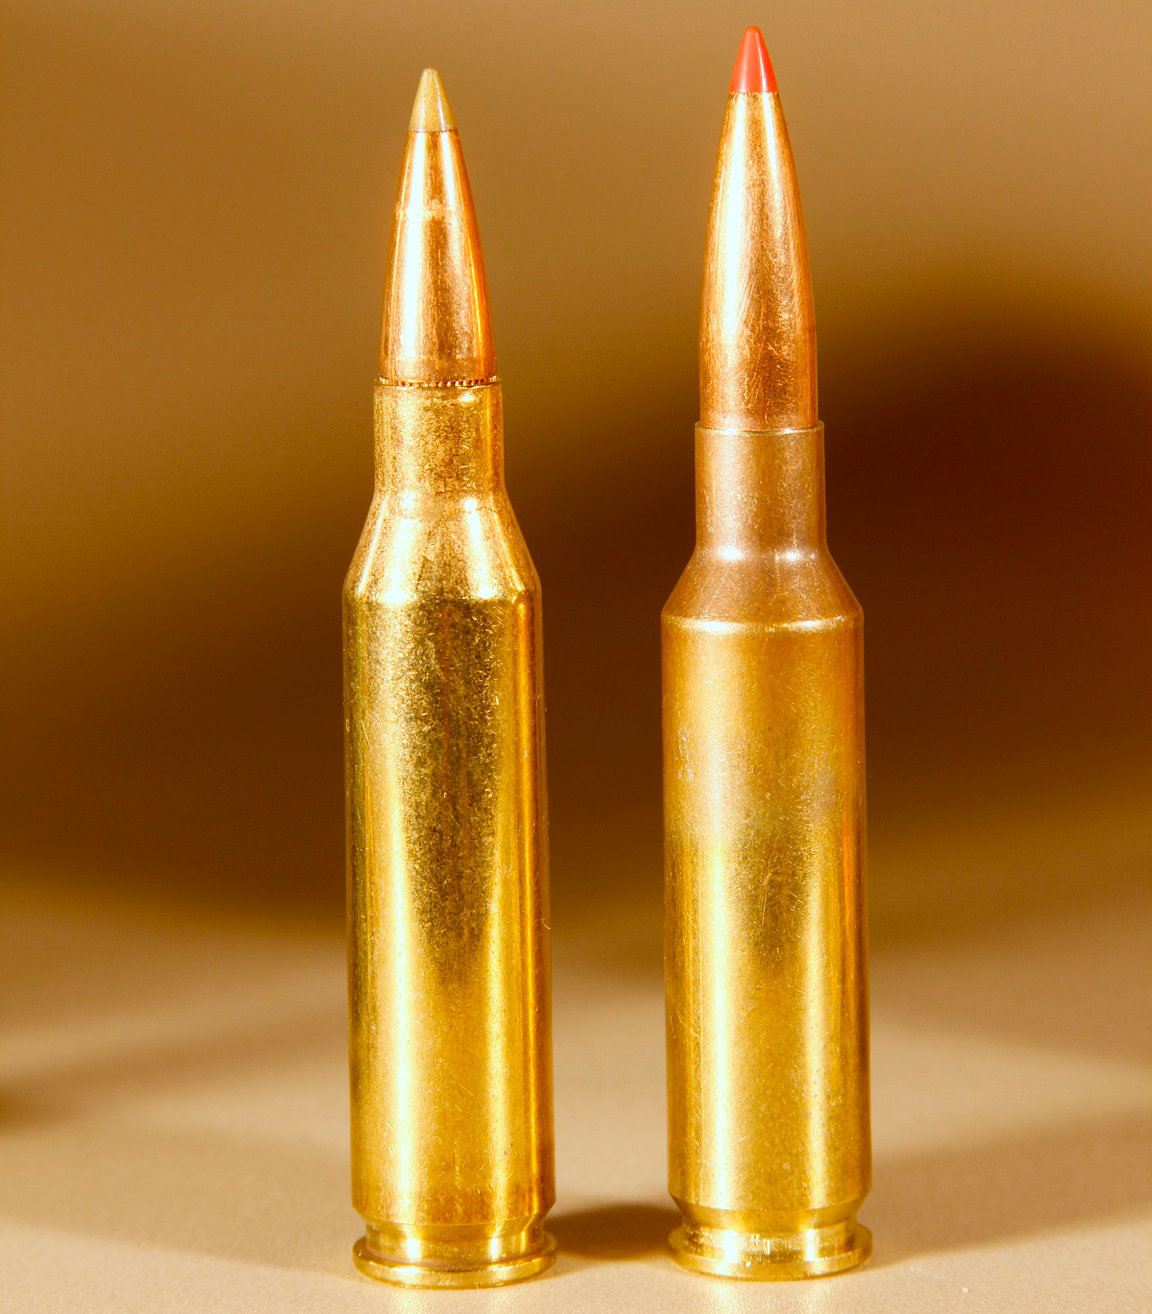 A side-by-side of rifle cartrdiges.